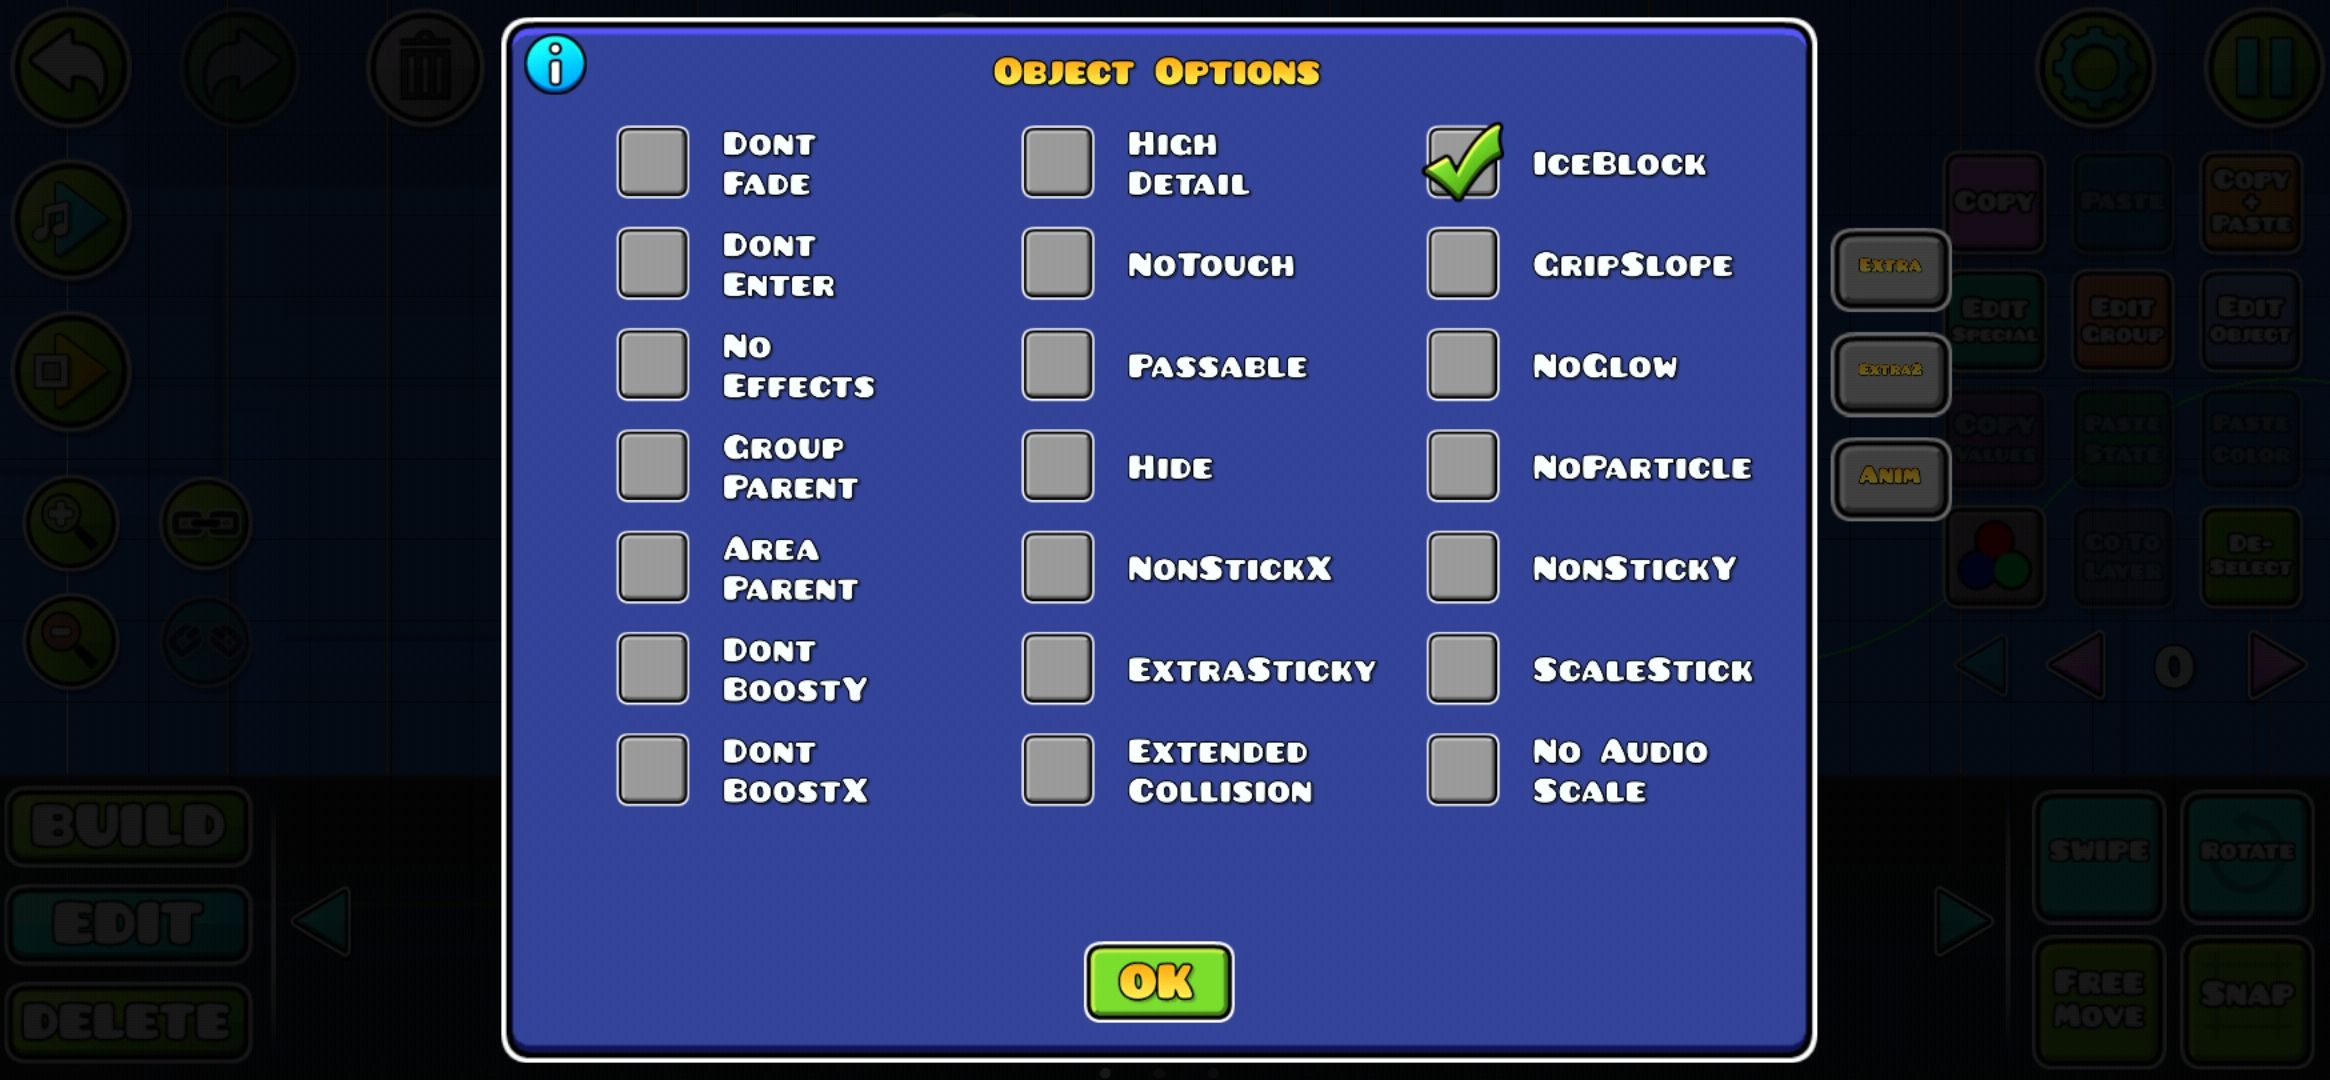 IceBlock option ticked in the Object Options menu of Geometry Dash.